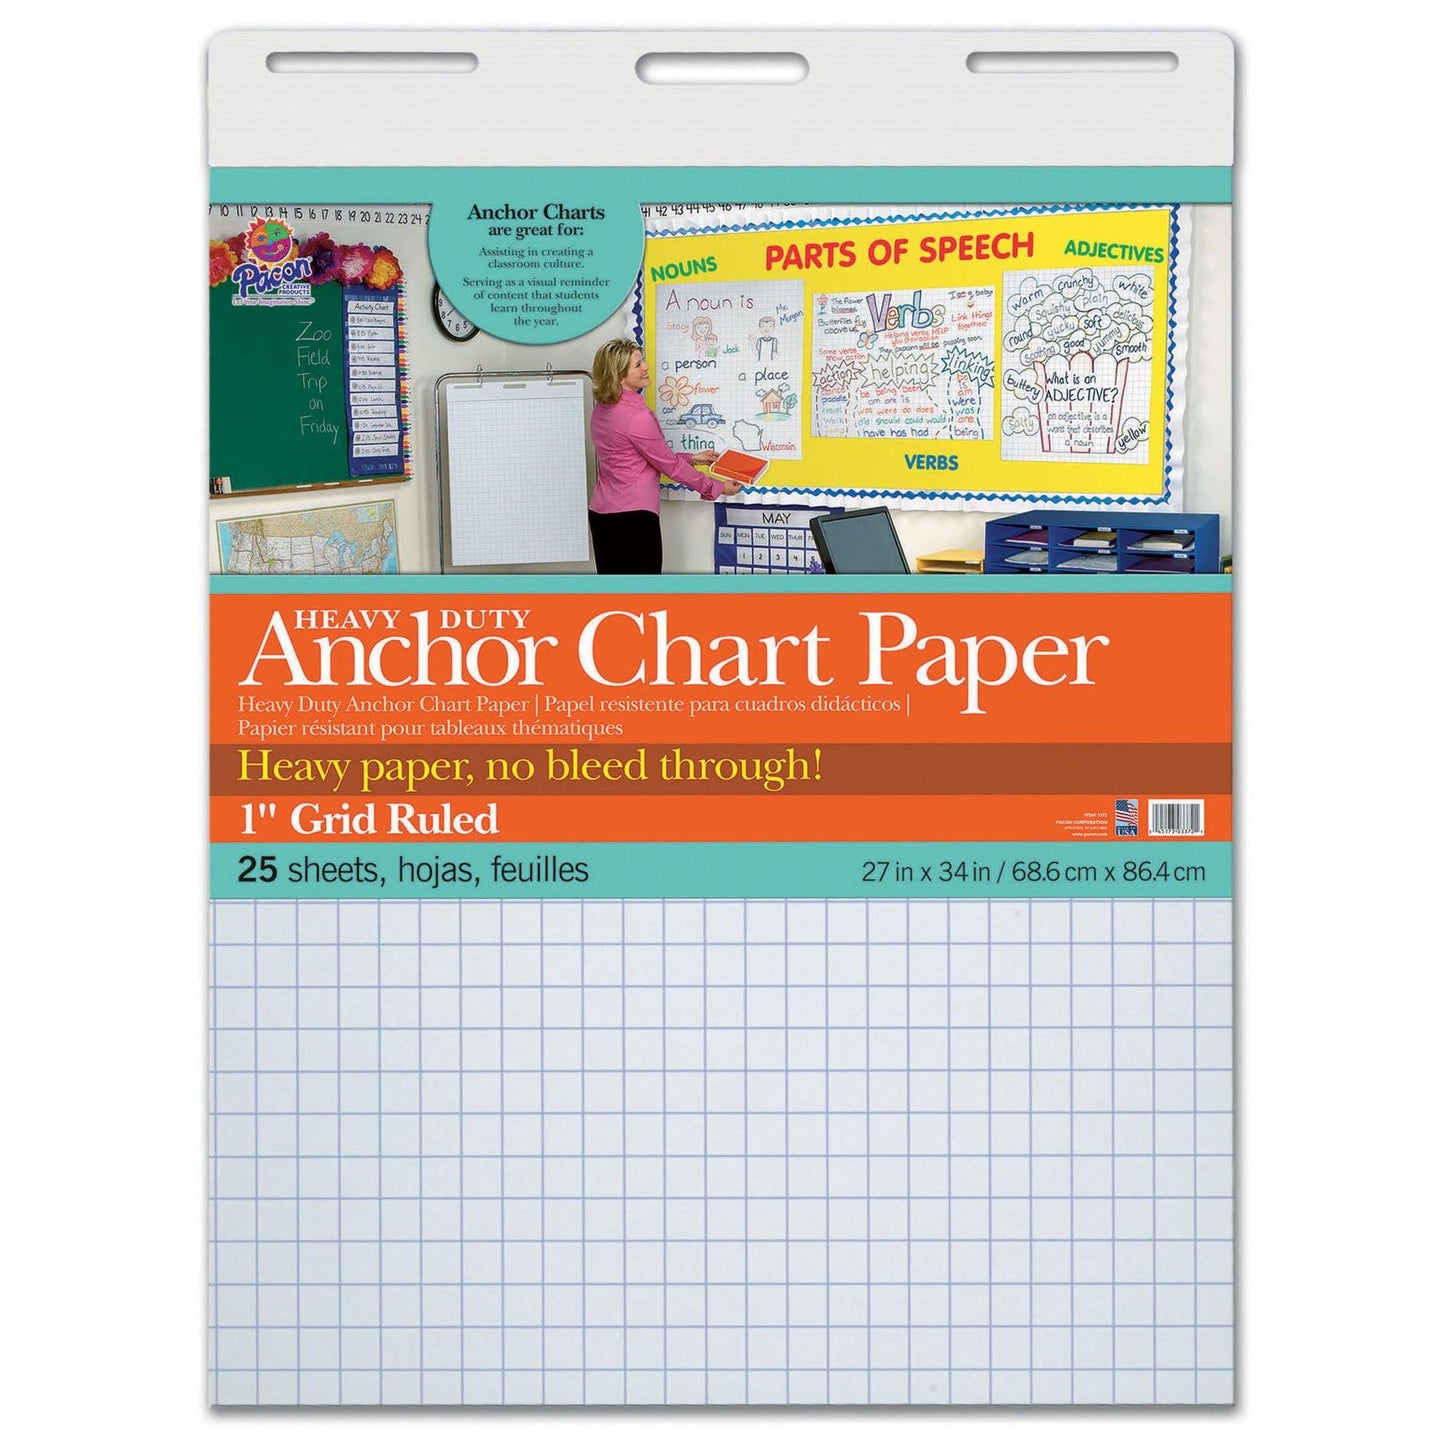 Heavy Duty Anchor Chart Paper, Non-Adhesive, White, 1" Grid Ruled 27" x 34", 25 Sheets - Loomini